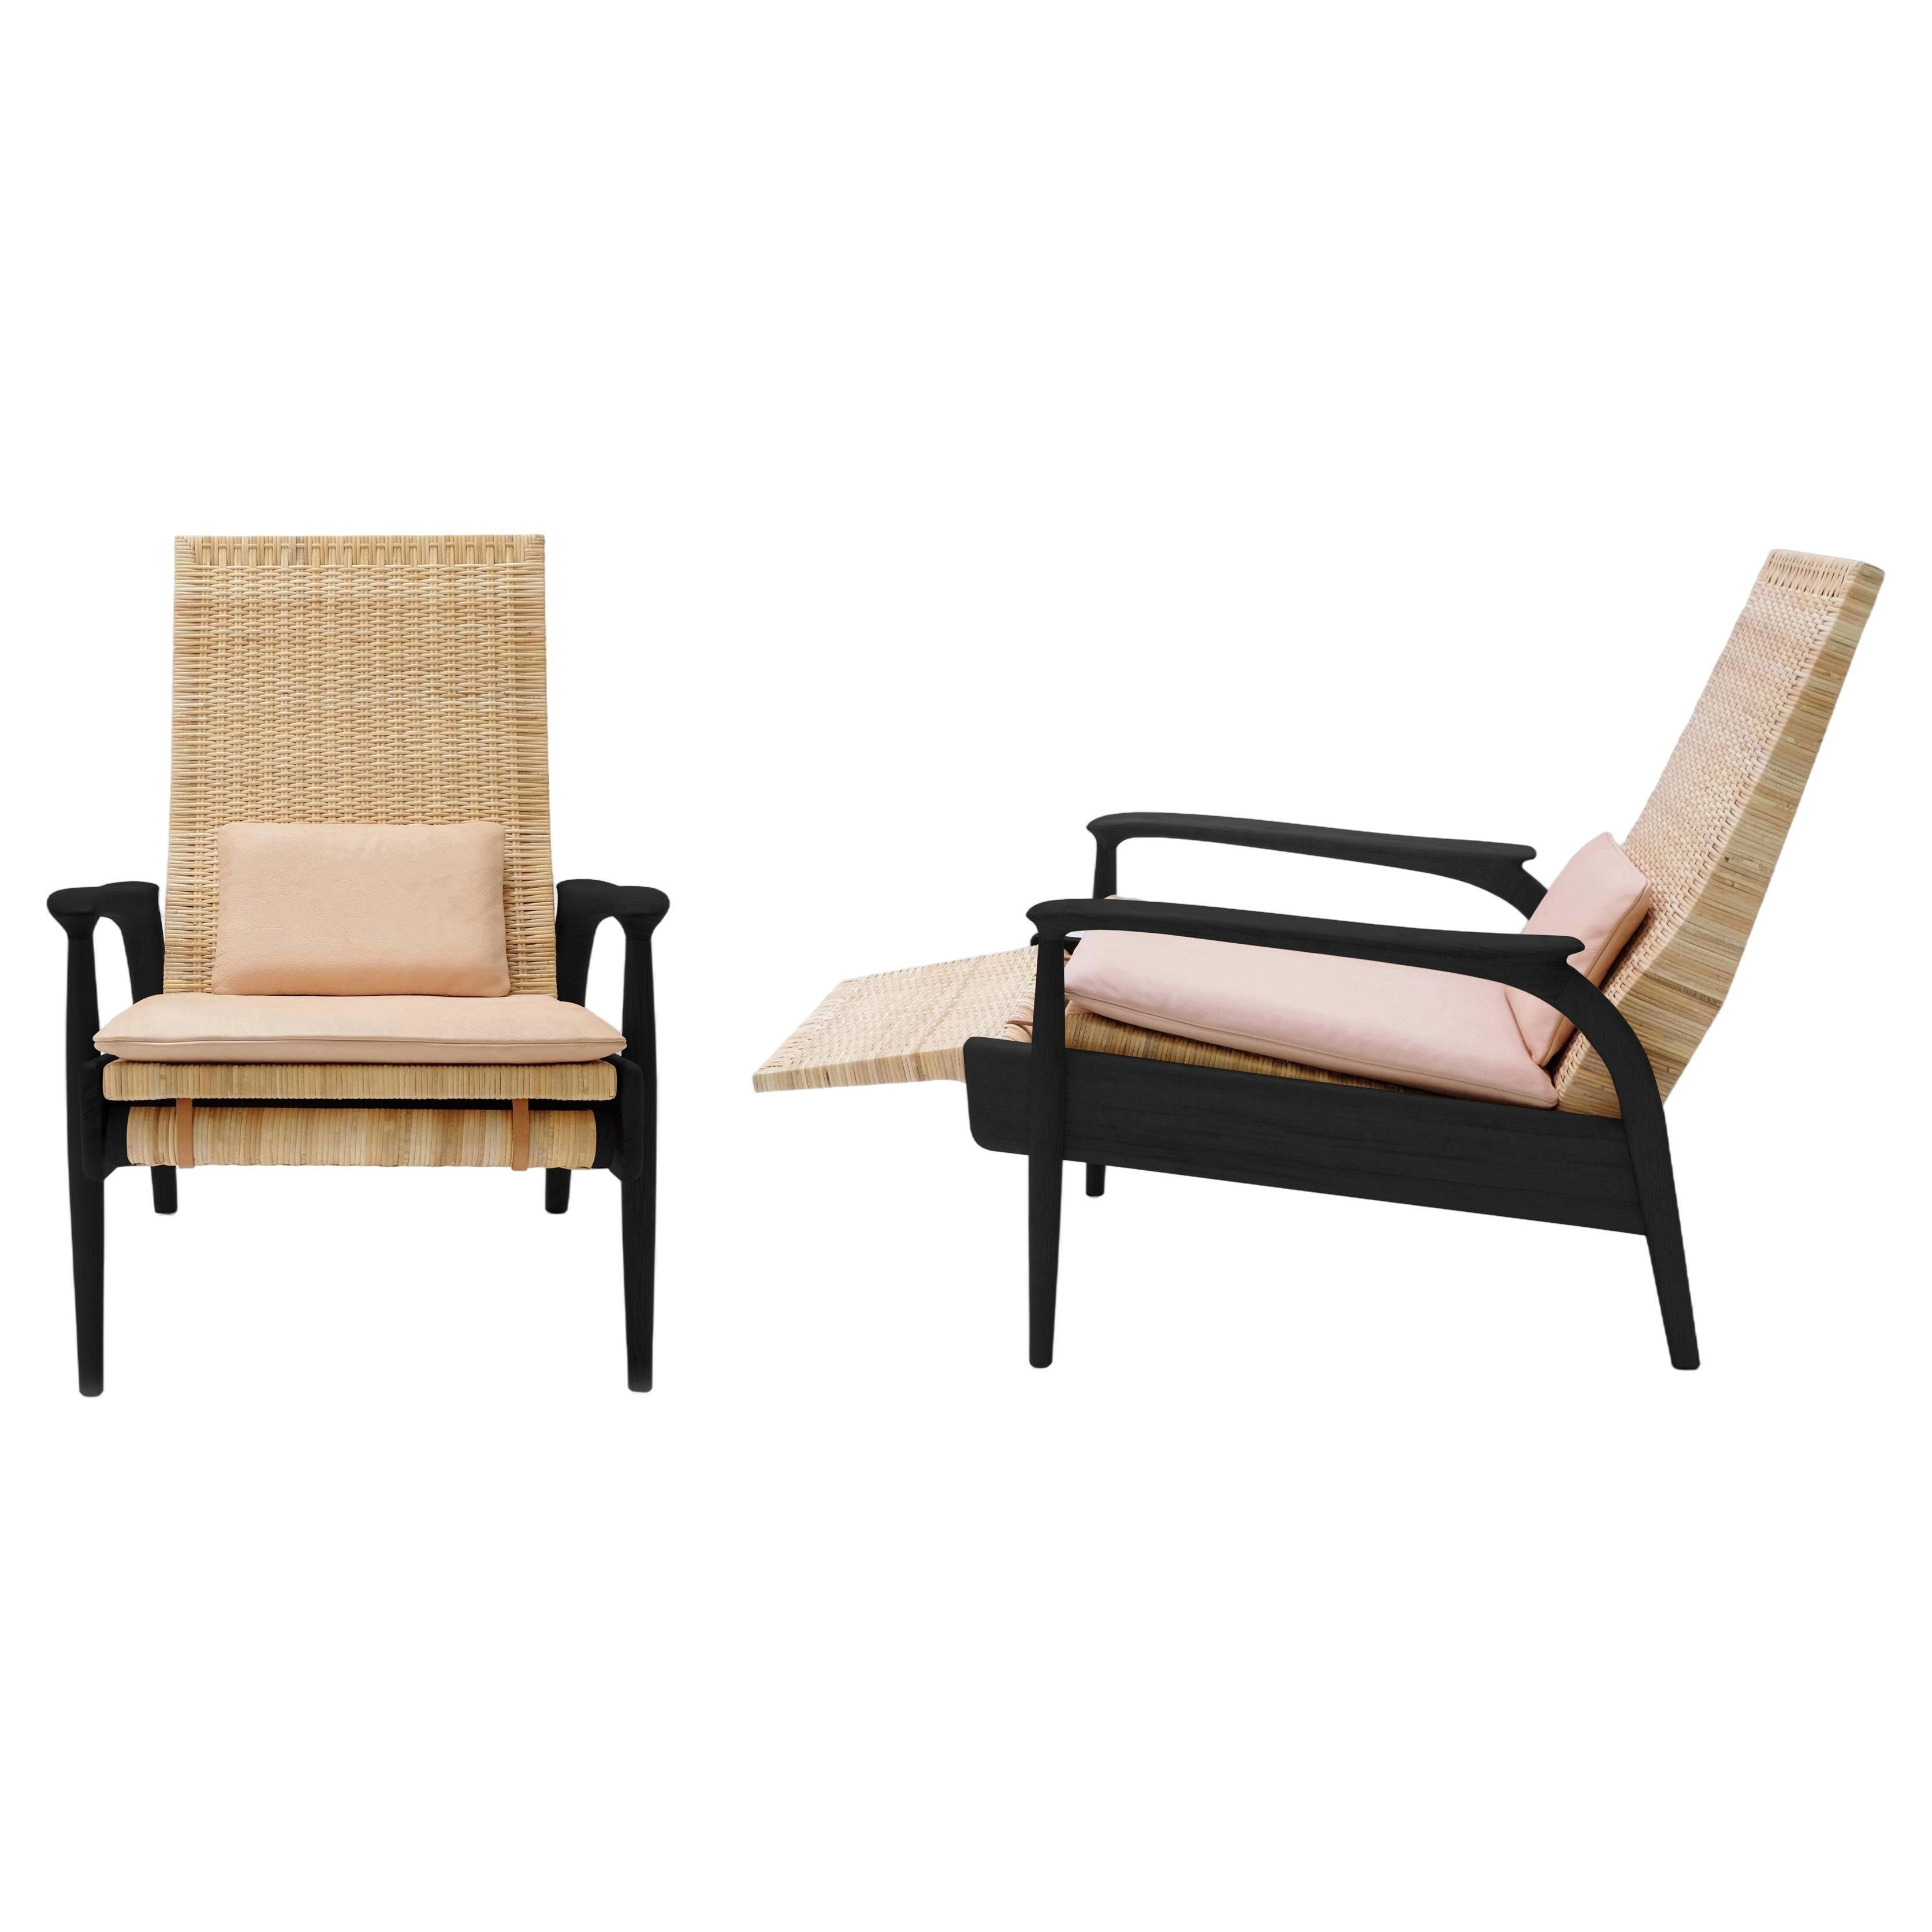 Pair of Eco-Armchairs, Blackened Oak, Handwoven Natural Cane, Leather Cushions